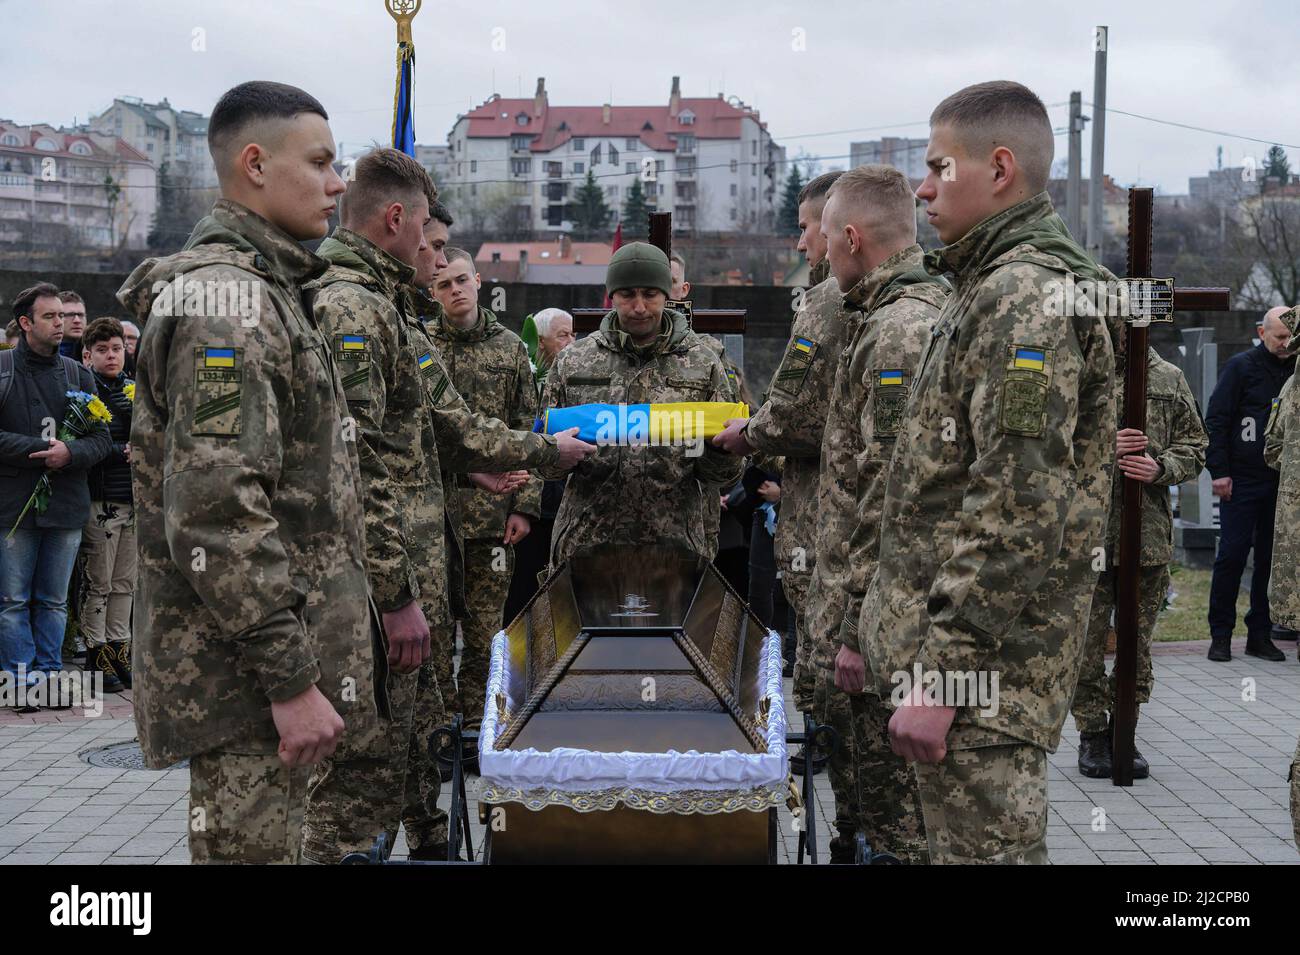 Lviv, Ukraine. 31st Mar, 2022. Ukrainian servicemen uncover the flag from a coffin during the burial. Funeral ceremony of 3 Ukrainian soldiers Kozachenko Andriy, Sarkisyan Ihor, Oliynyk Yuriy killed by Russian forces amid the Russian invasion in Lviv. (Credit Image: © Mykola Tys/SOPA Images via ZUMA Press Wire) Stock Photo